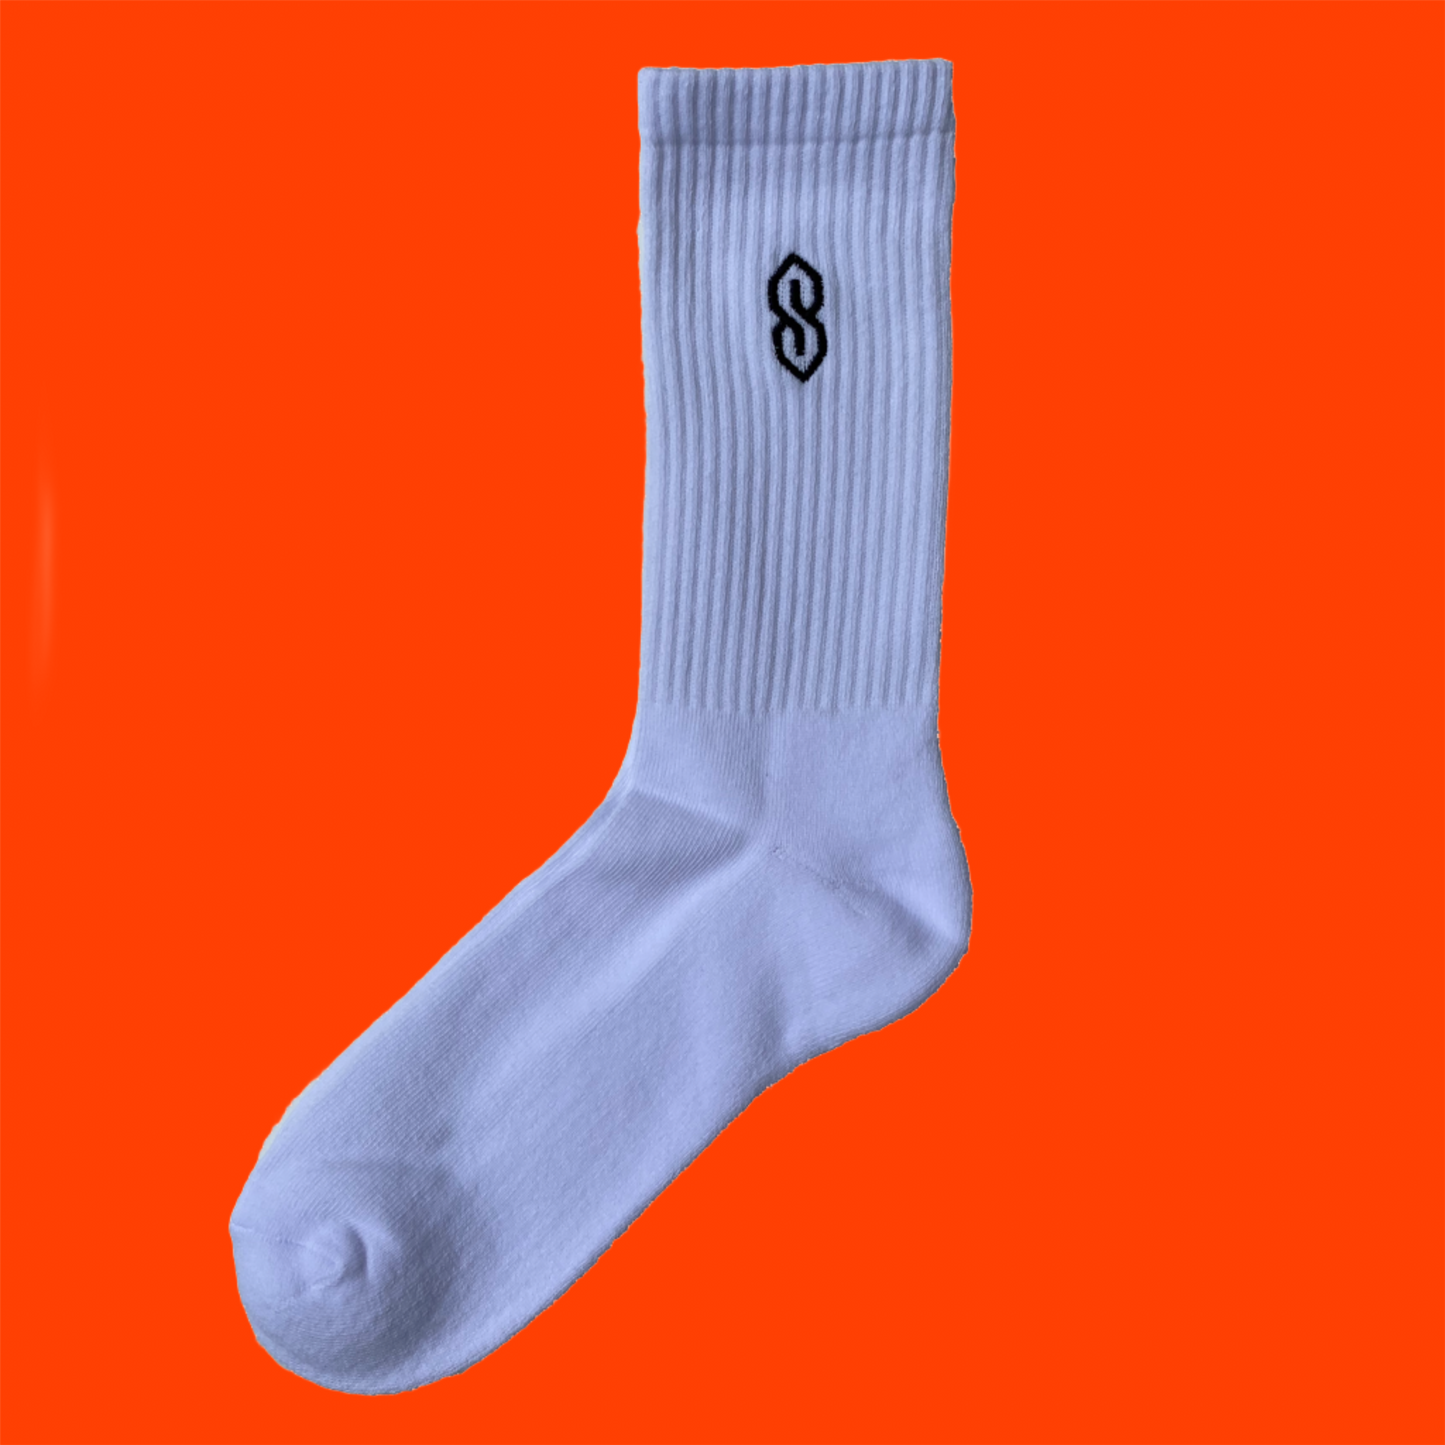 The S Thing Socks™